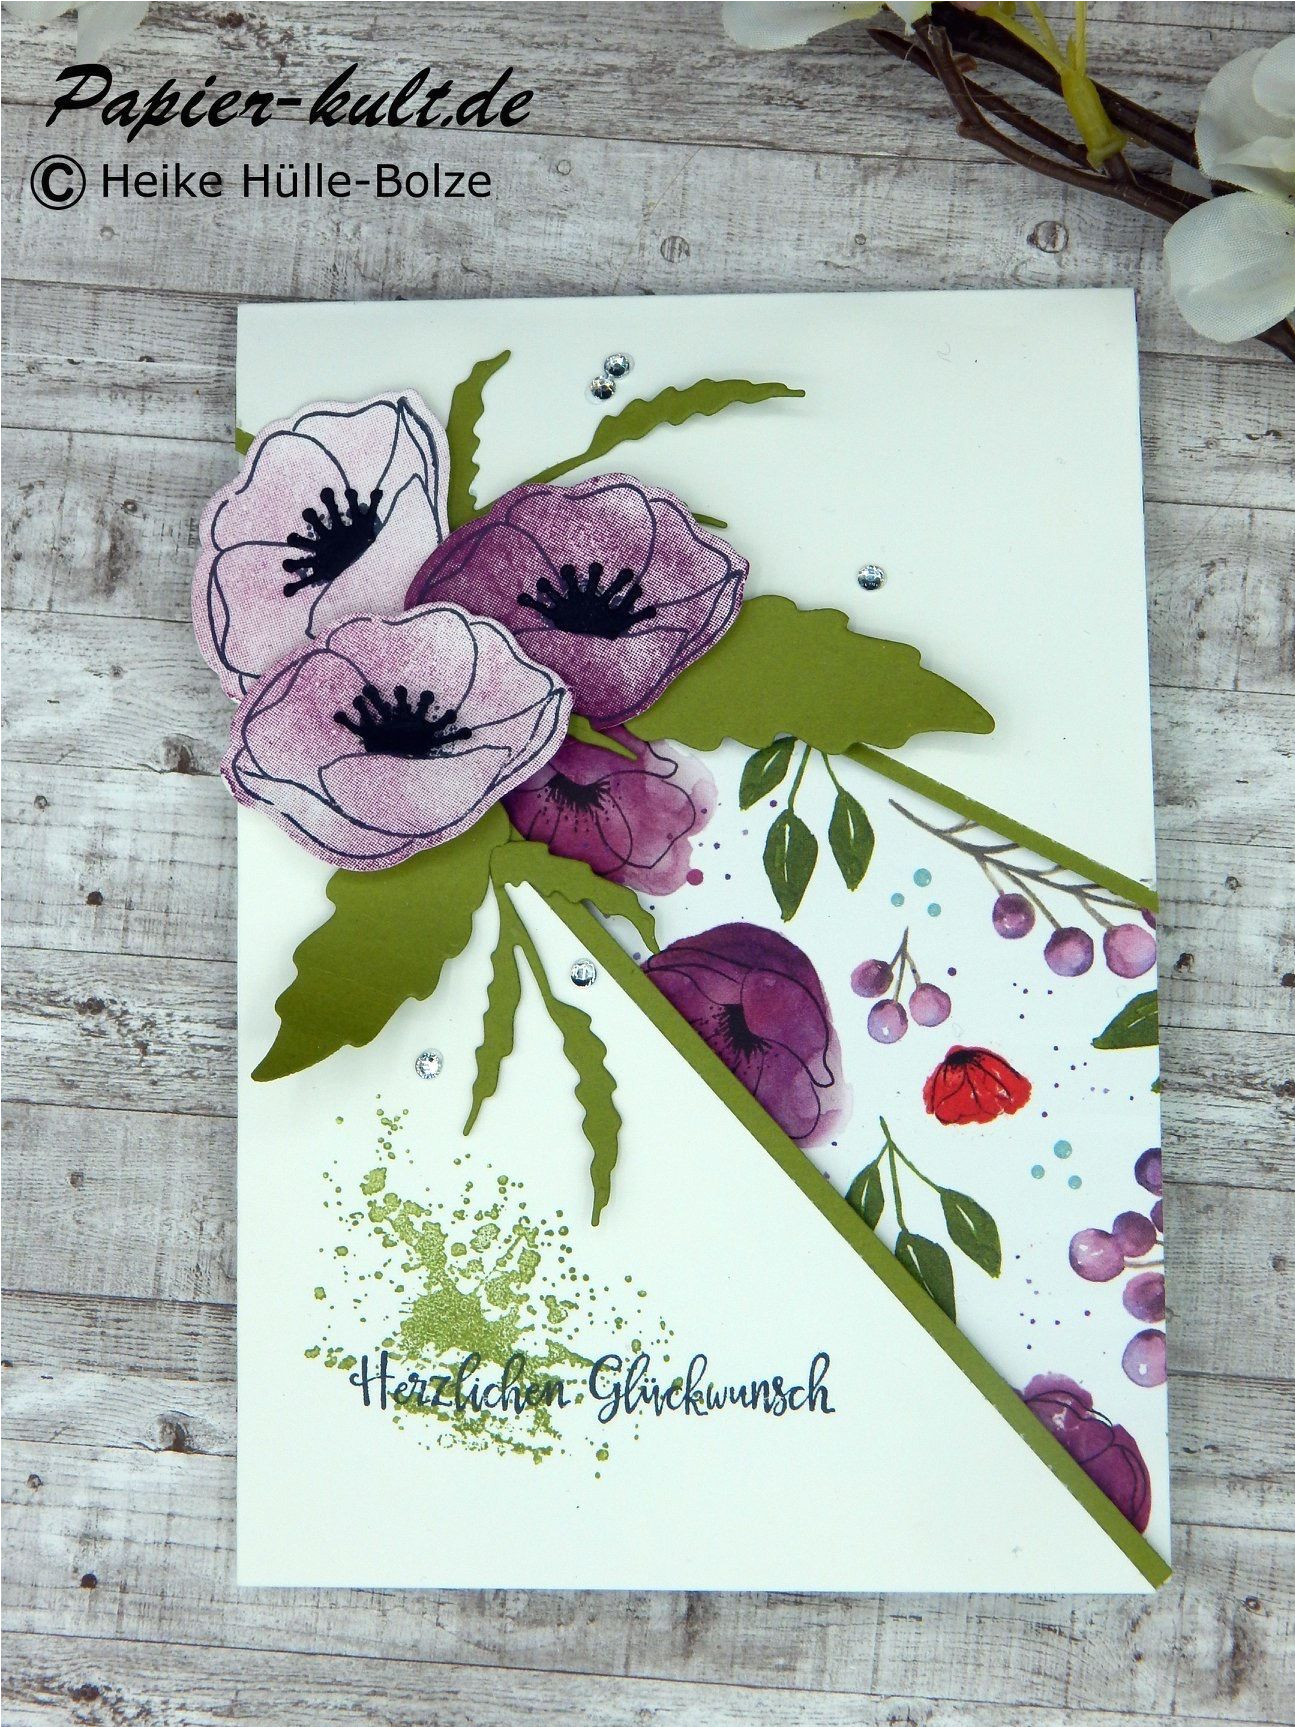 Flower Rubber Stamps Card Making Pin On Occasions 2020